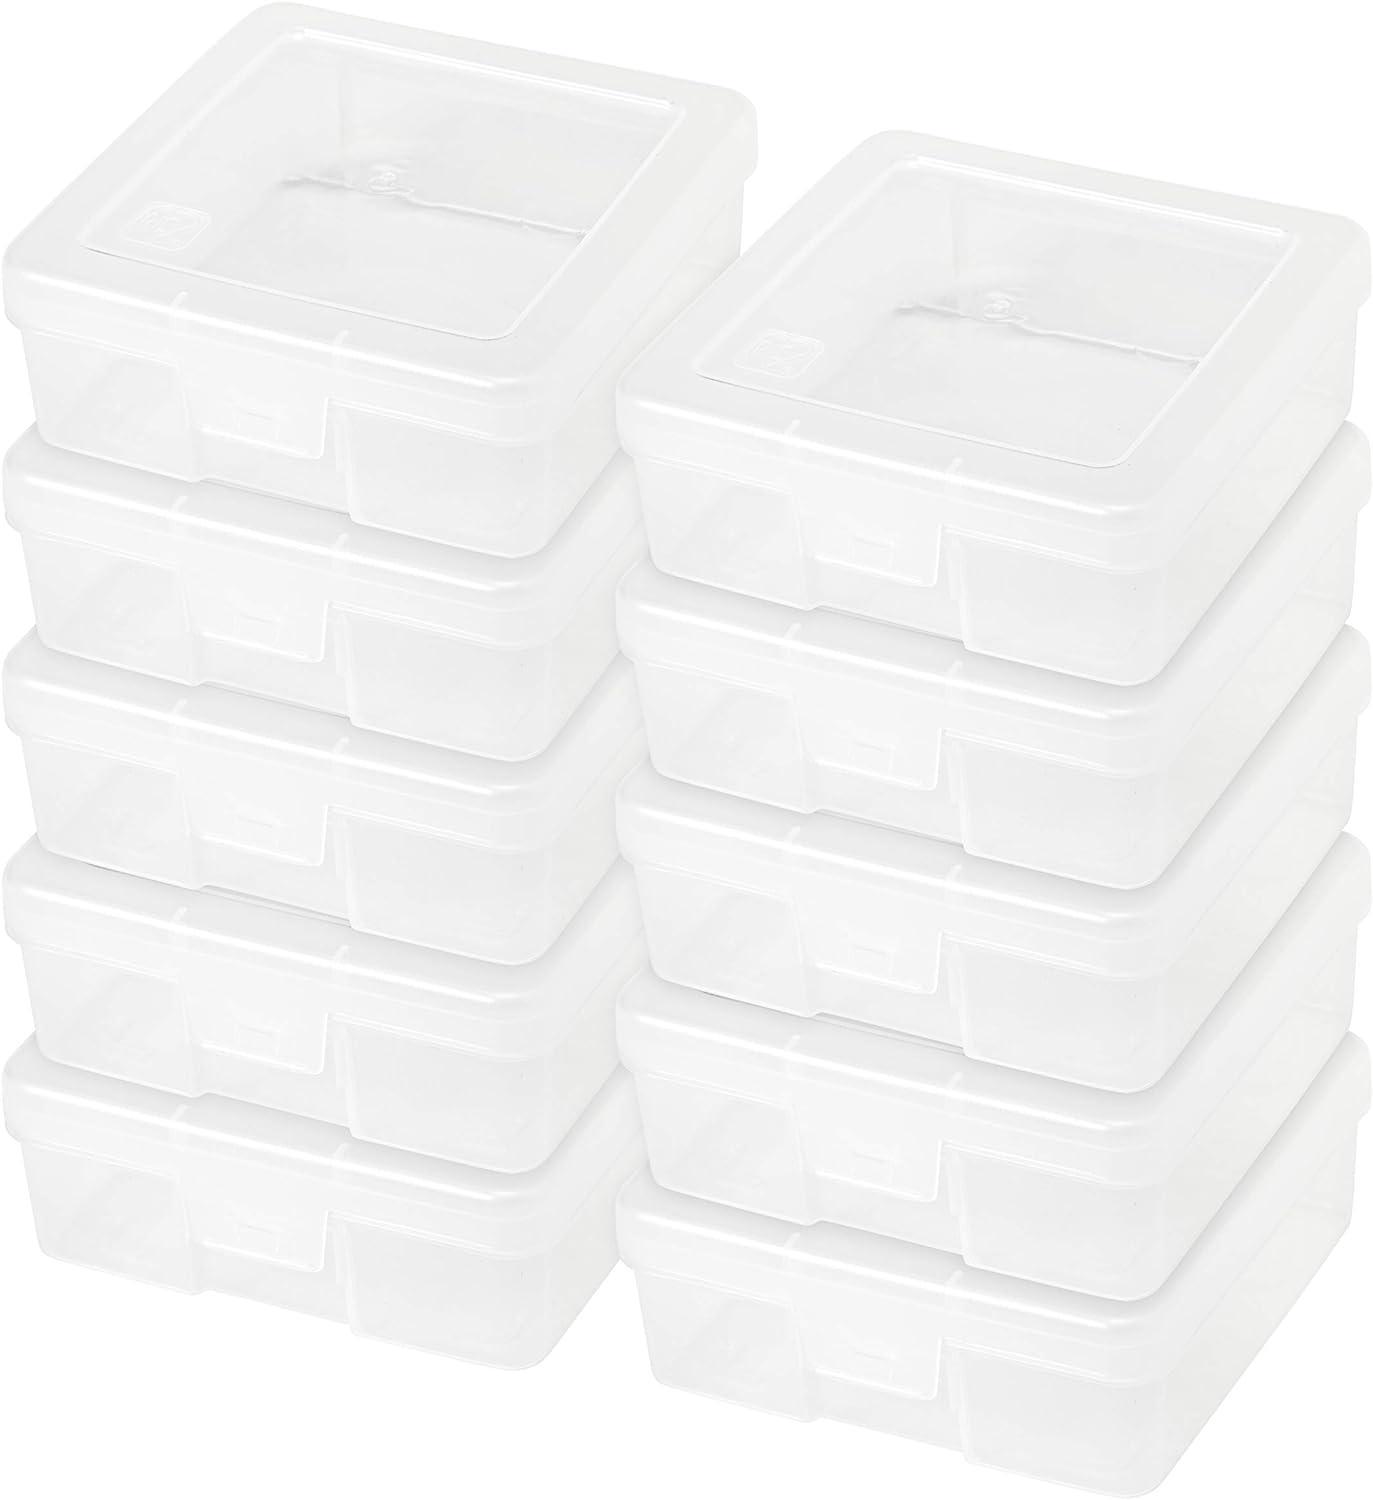  IRIS USA 6Pack 8.5 x 11 Portable Project Case